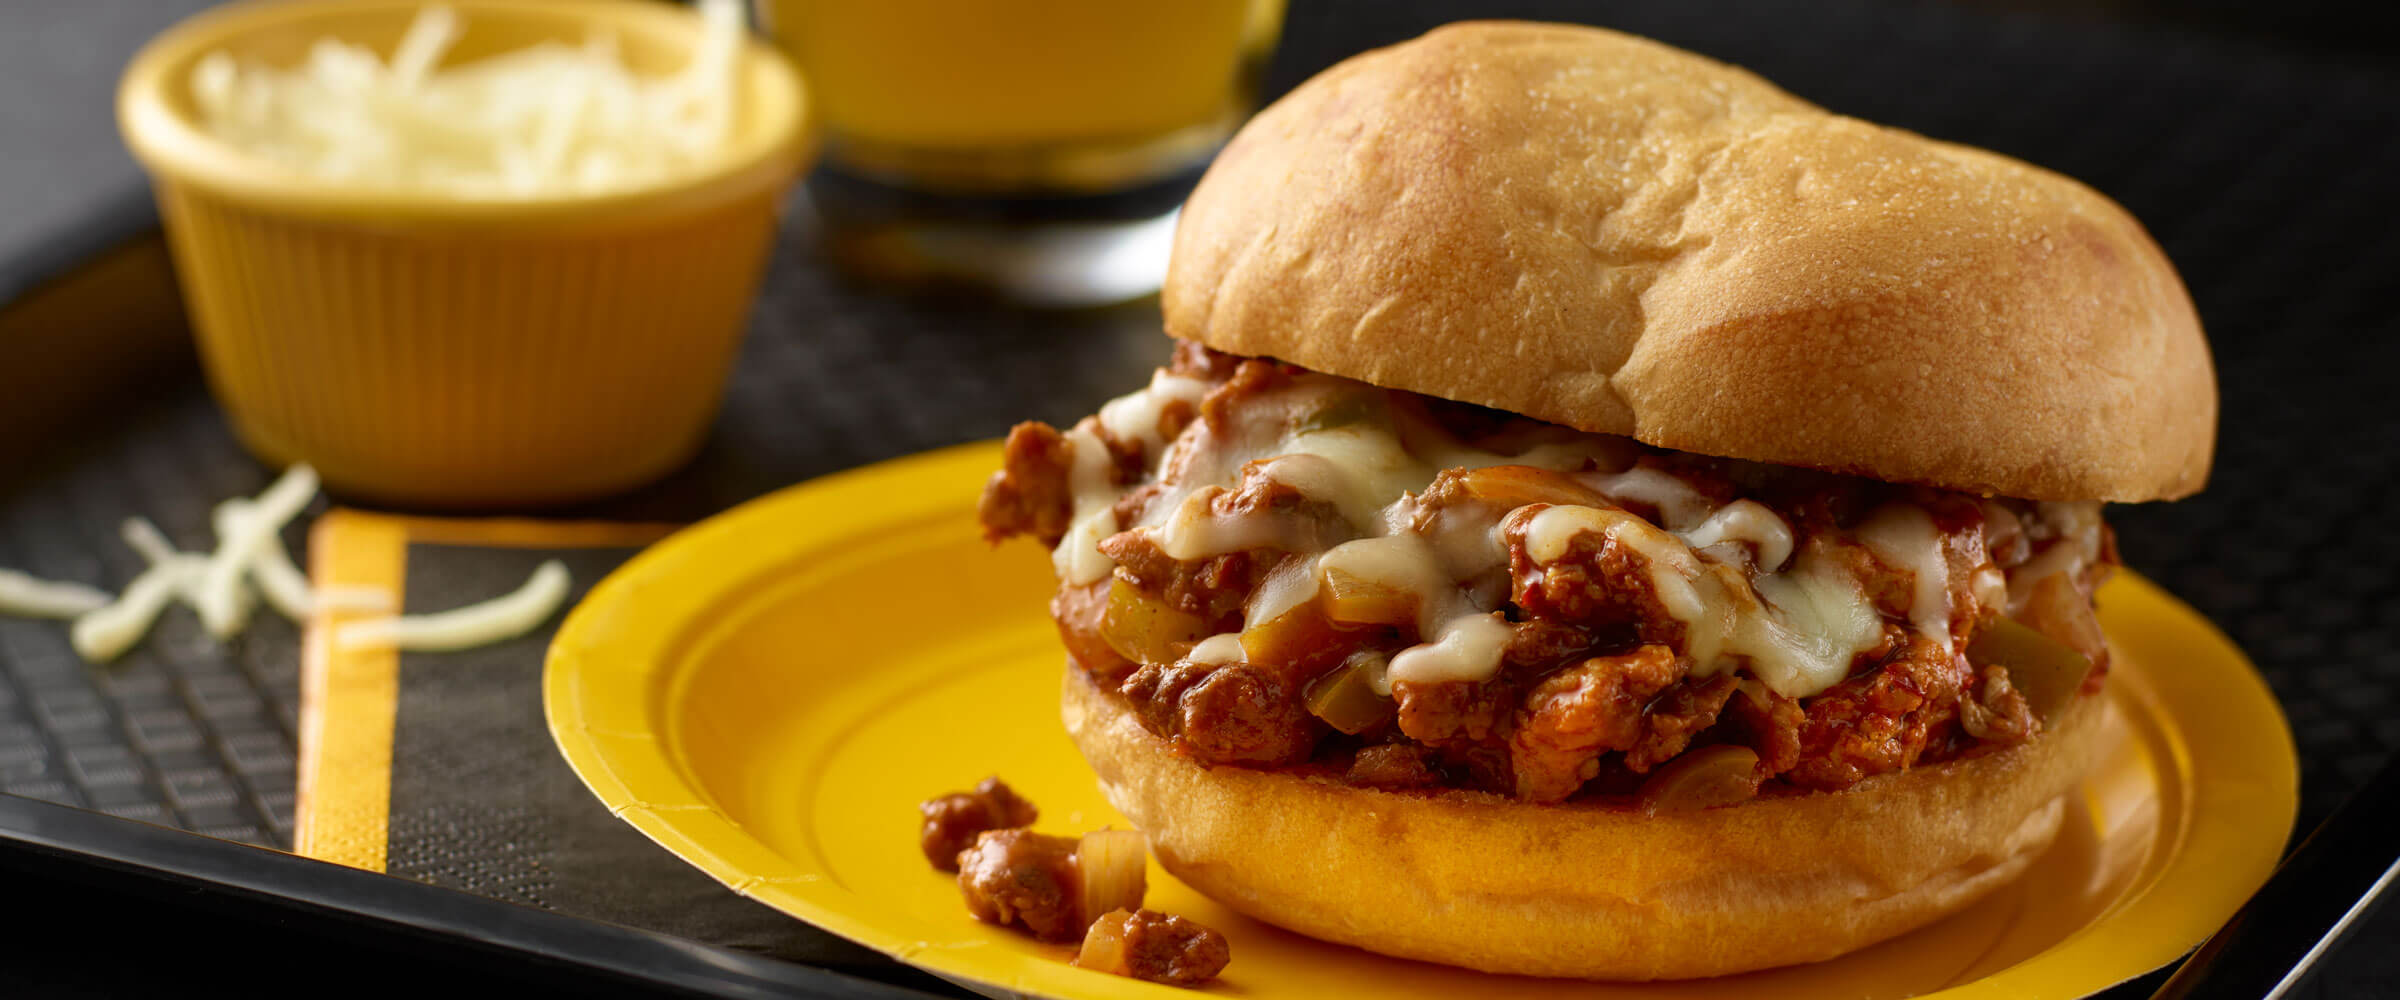 Hot Sausage Chili Sloppies on a yellow plate with extra cheese on the side